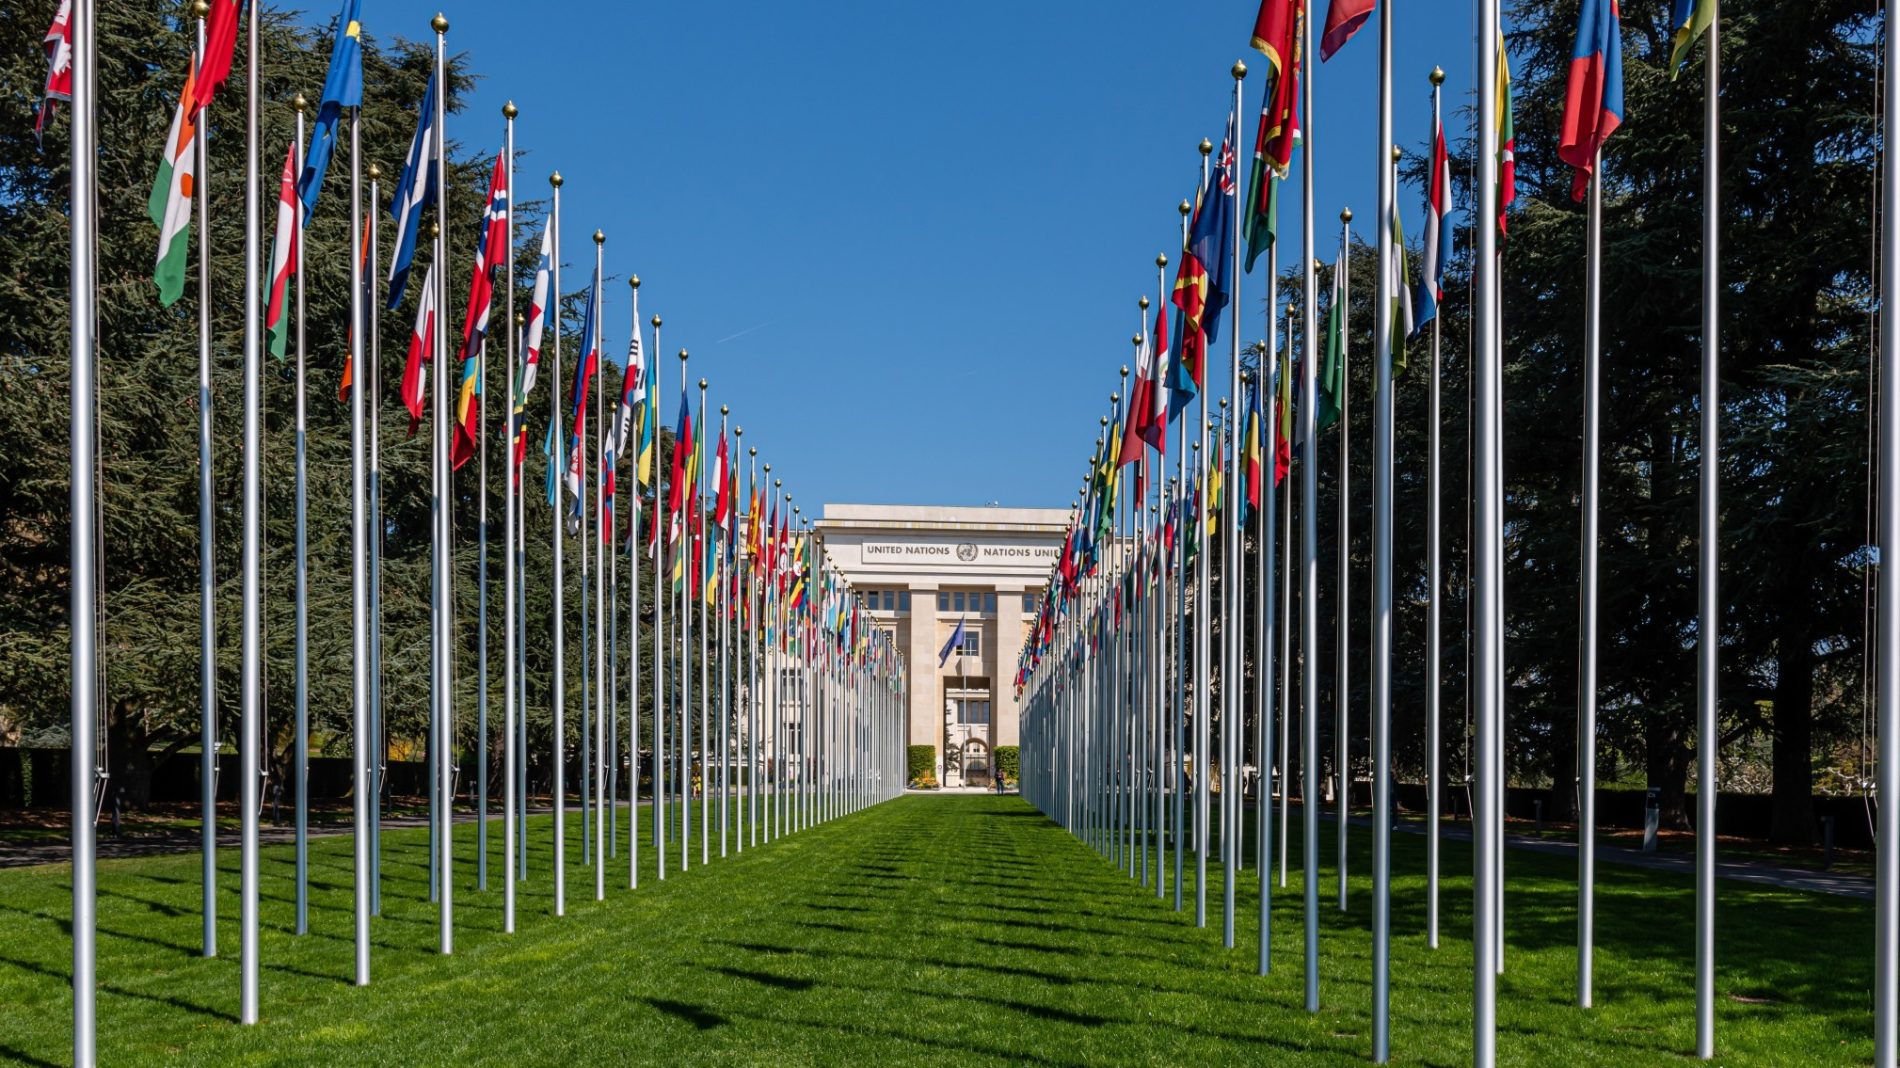 geneva-switzerland-the-palace-of-nations-building-in-geneva-is-the-headquarters-of-the-united-nations_t20_dxd24R